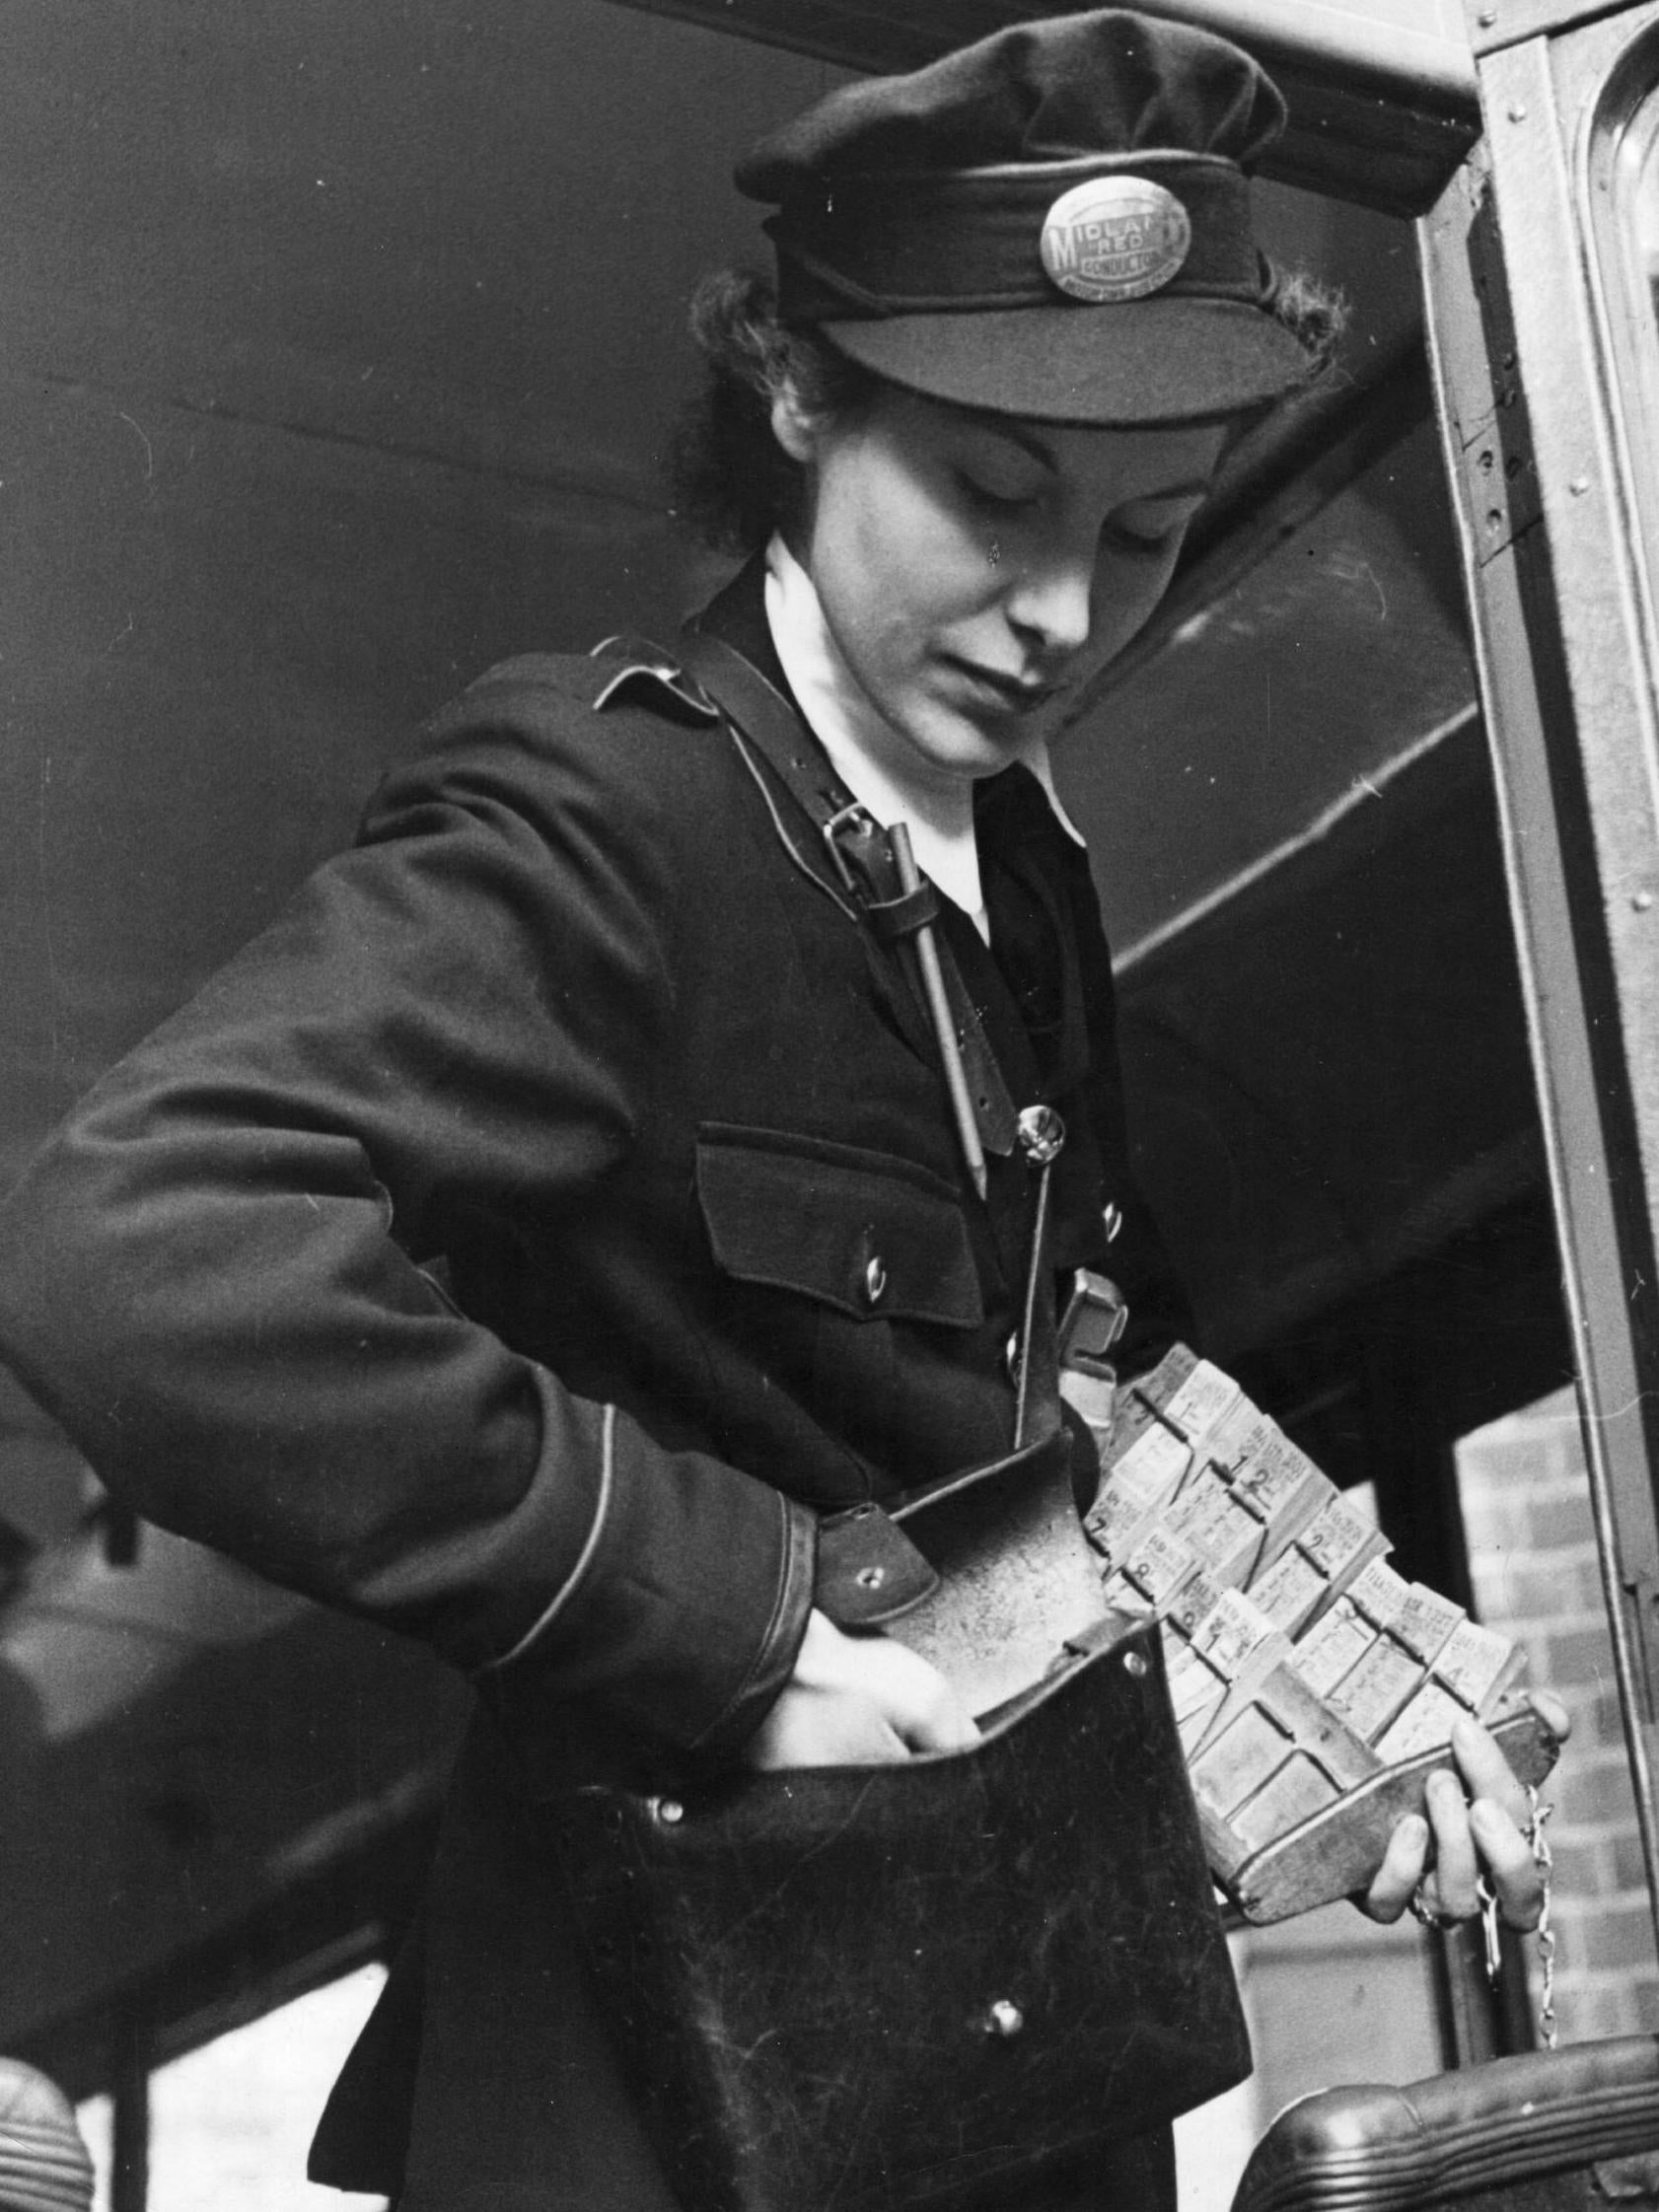 Training as a bus conductor in 1941